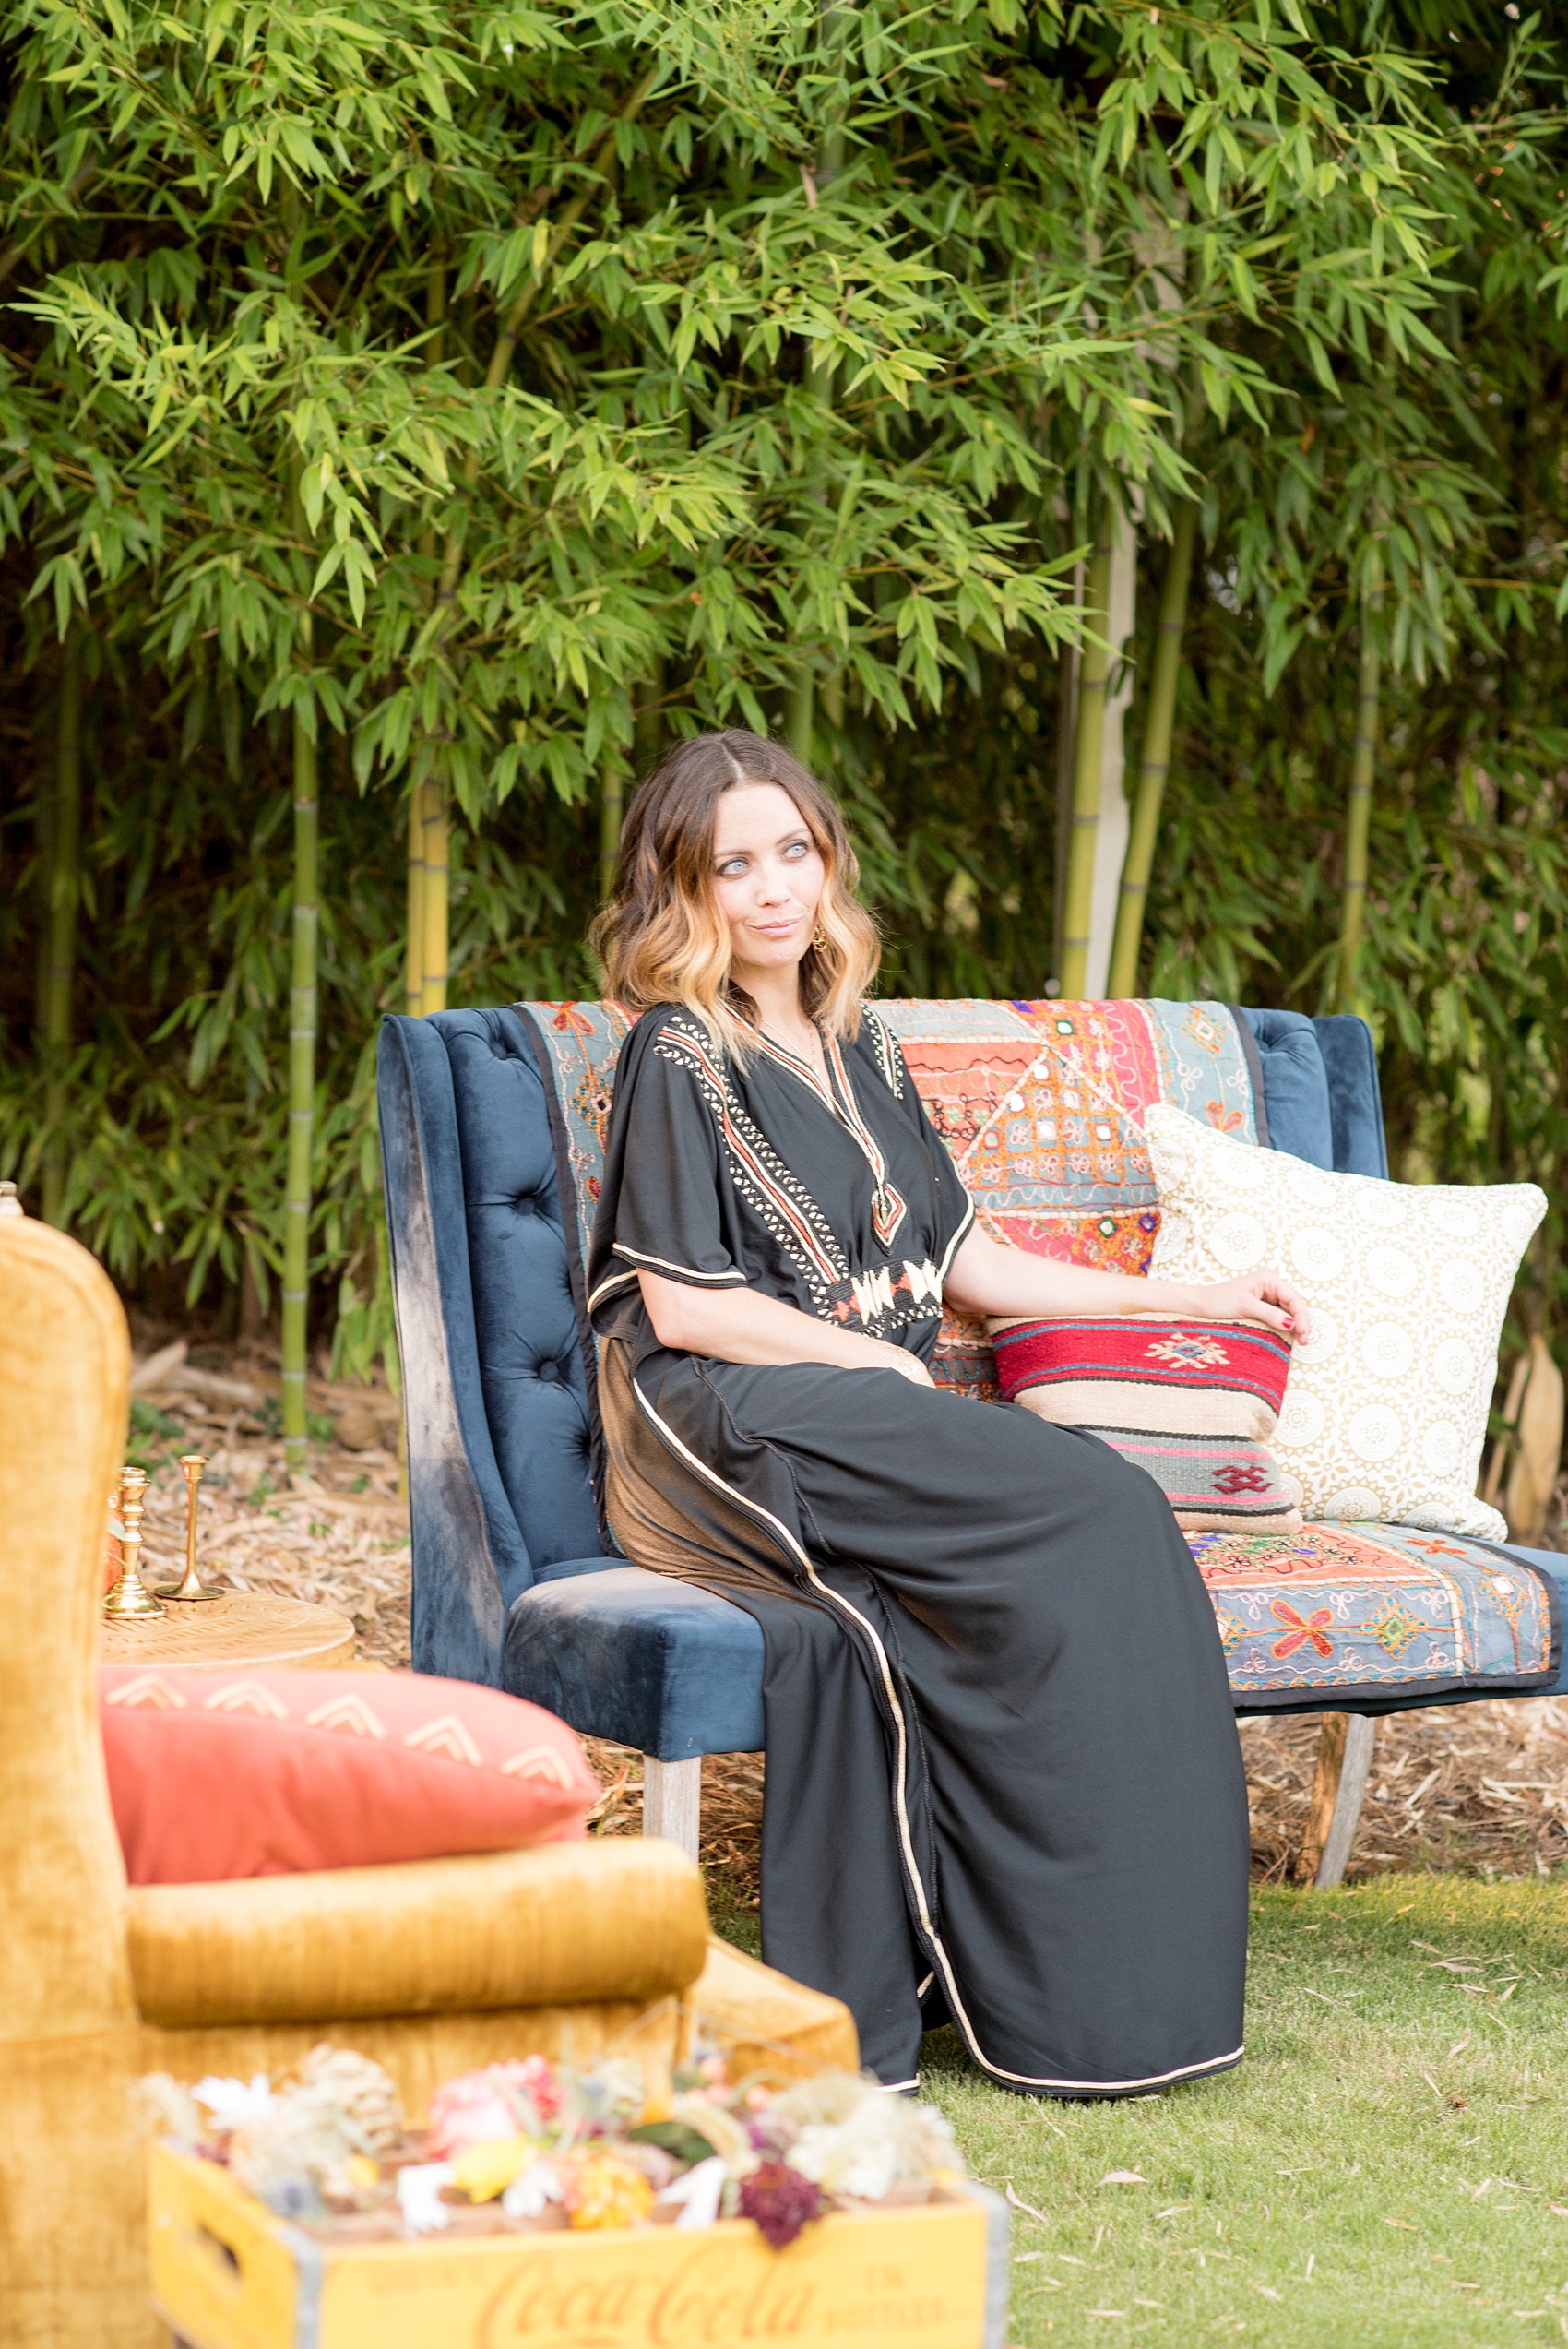 Mikkel Paige Photography photo of Moroccan themed party with vintage furniture and festive attire.